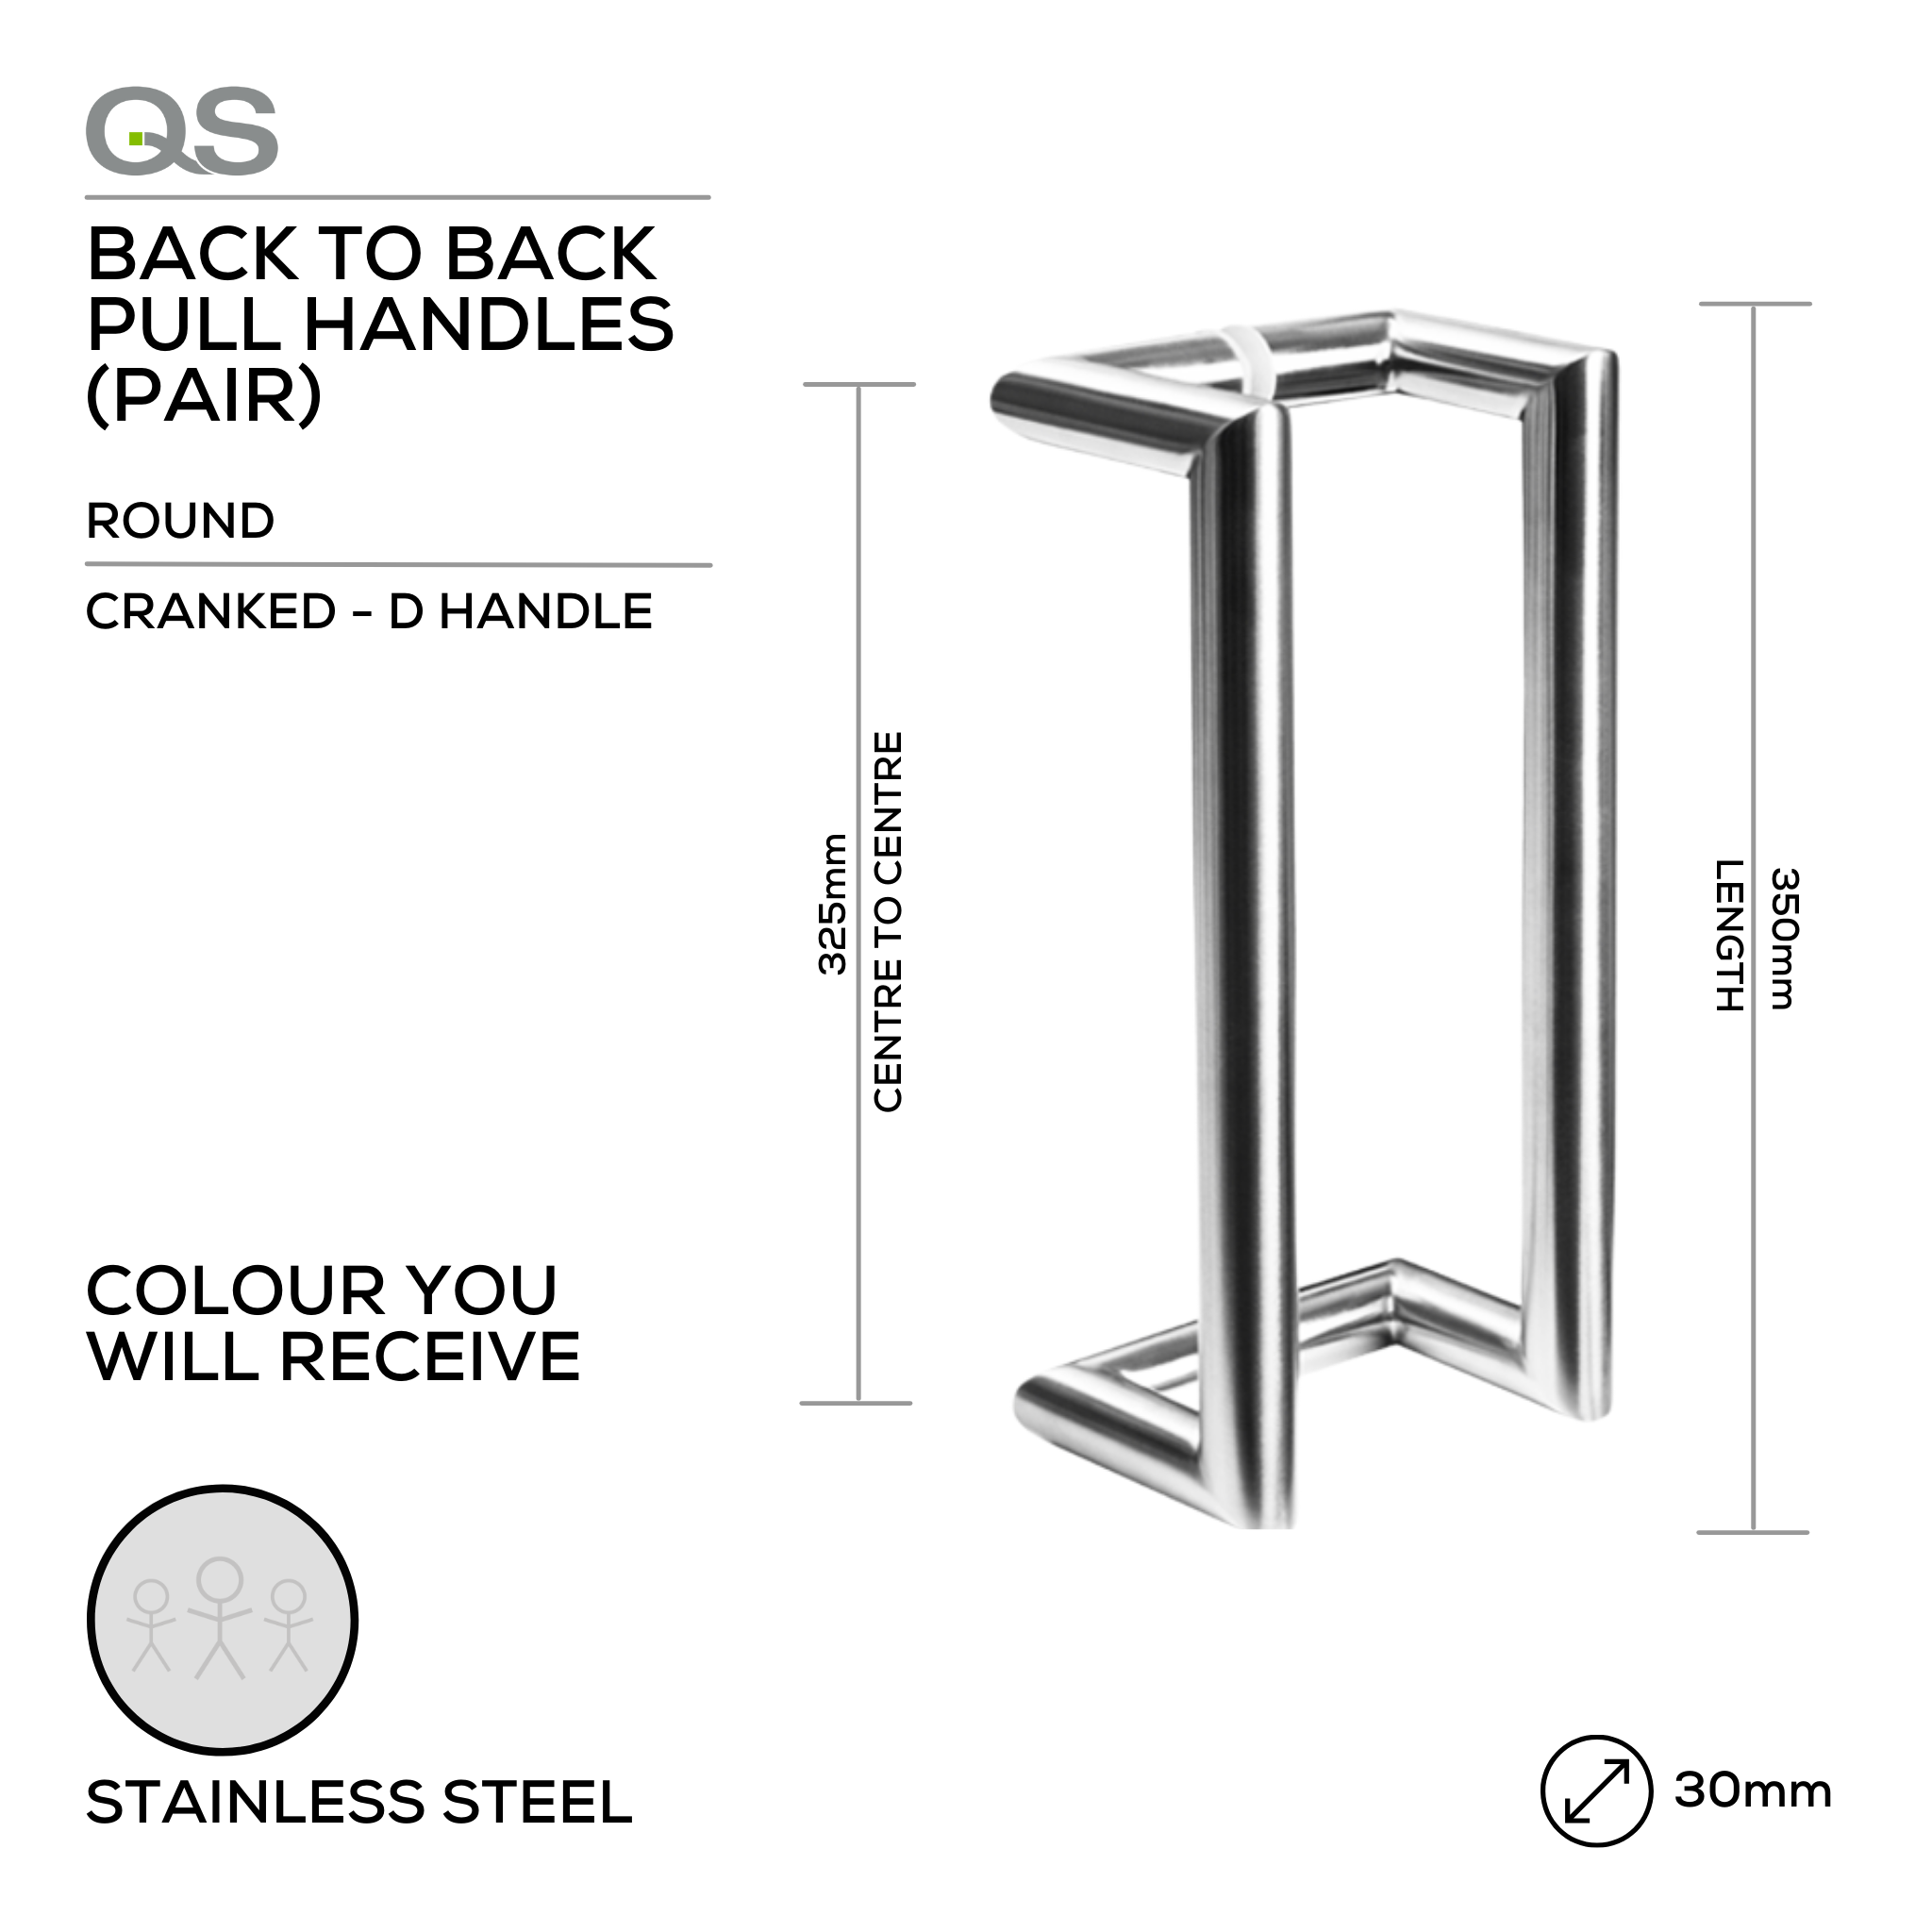 QS2603 Cranked Round D, Pull Handle, Round, Cranked, D Handle, BTB, 30mm (Ø) x 350mm (l) x 325mm (ctc), Stainless Steel, QS